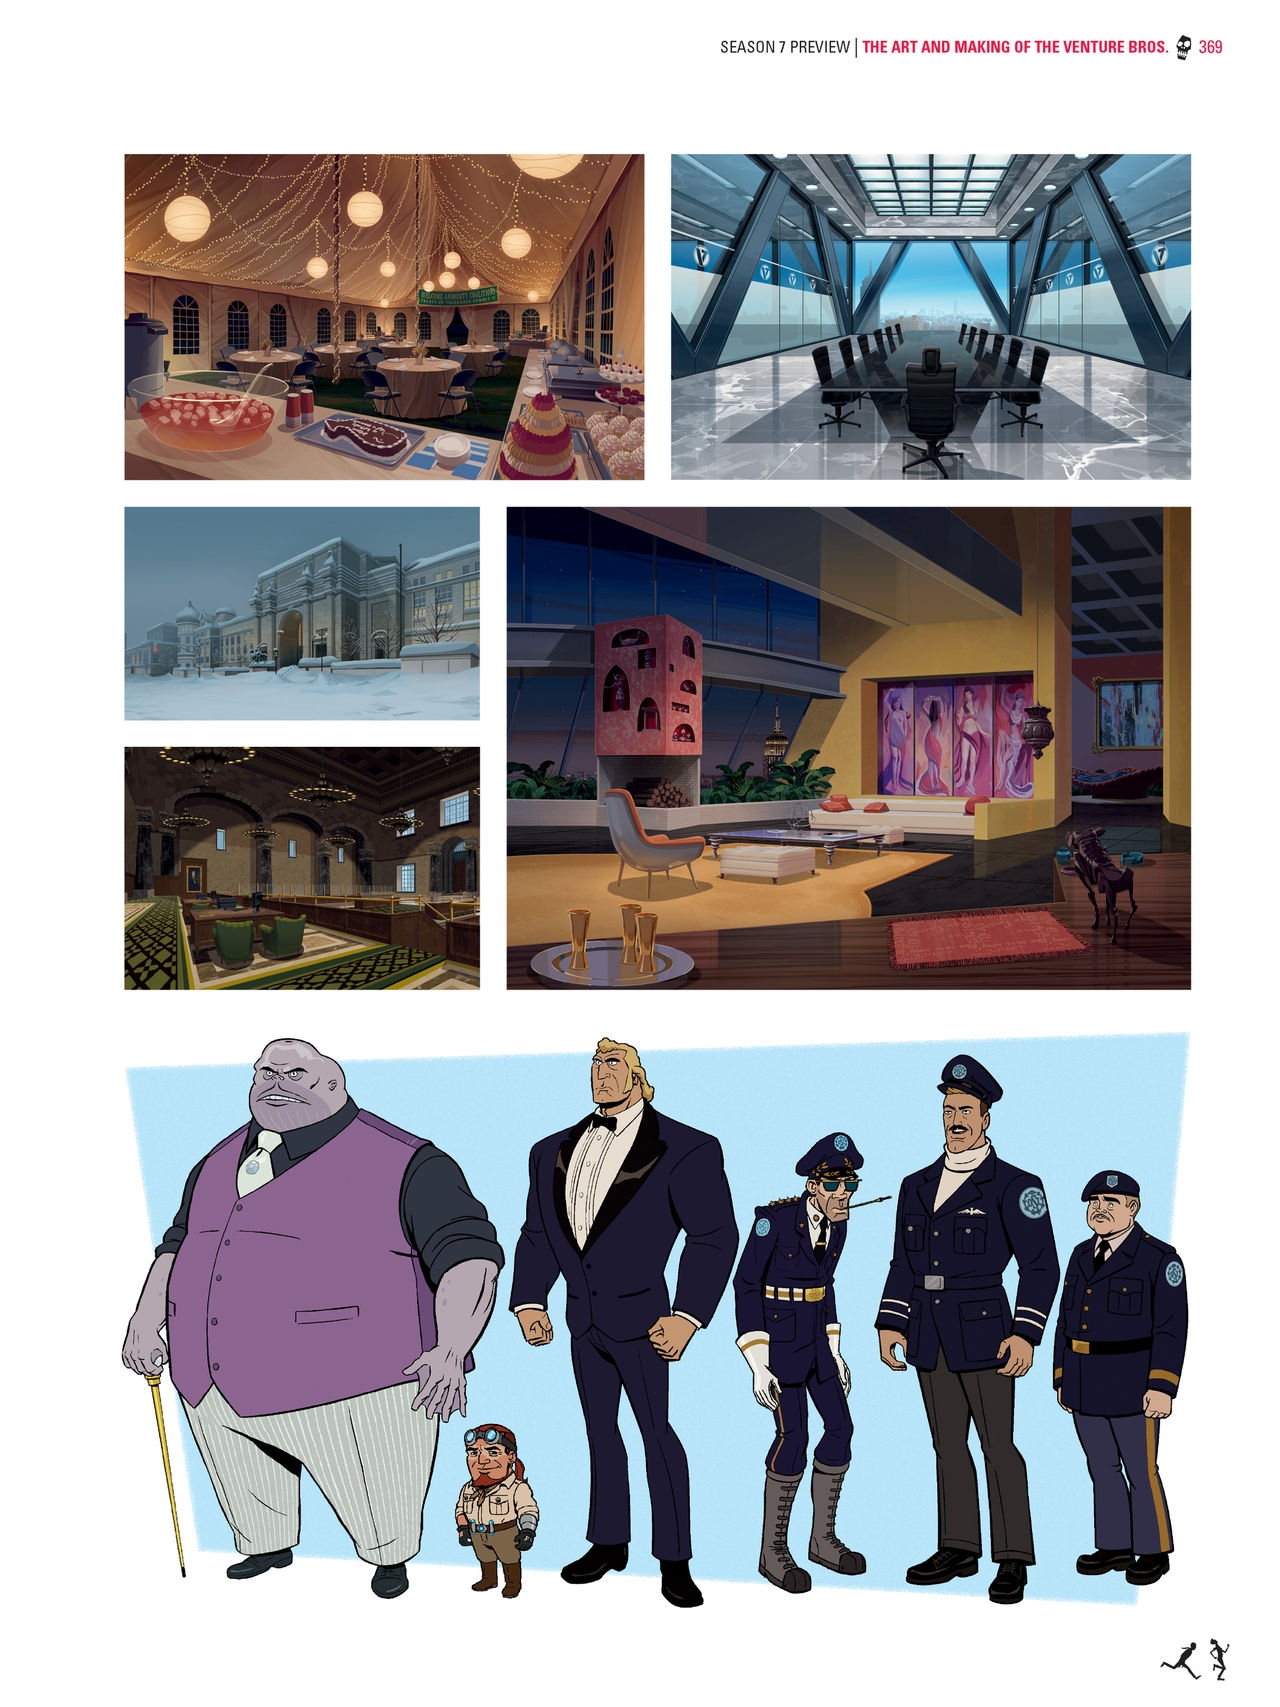 Go Team Venture! - The Art and Making of the Venture Bros 365